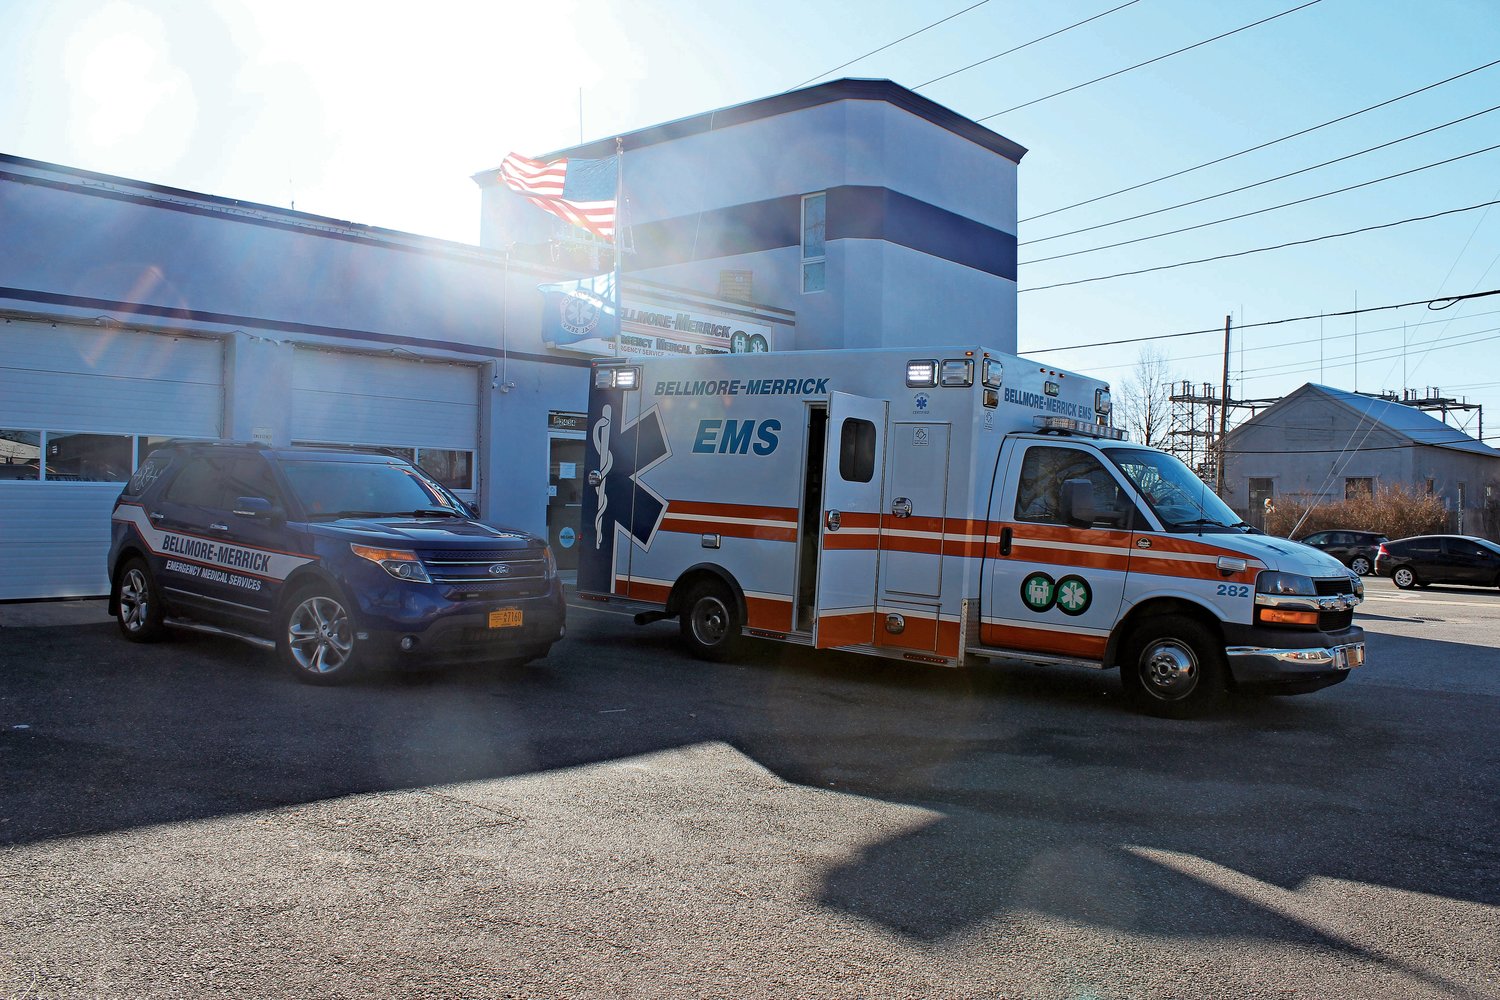 The Bellmore-Merrick Emergency Medical Services headquarters in Bellmore.